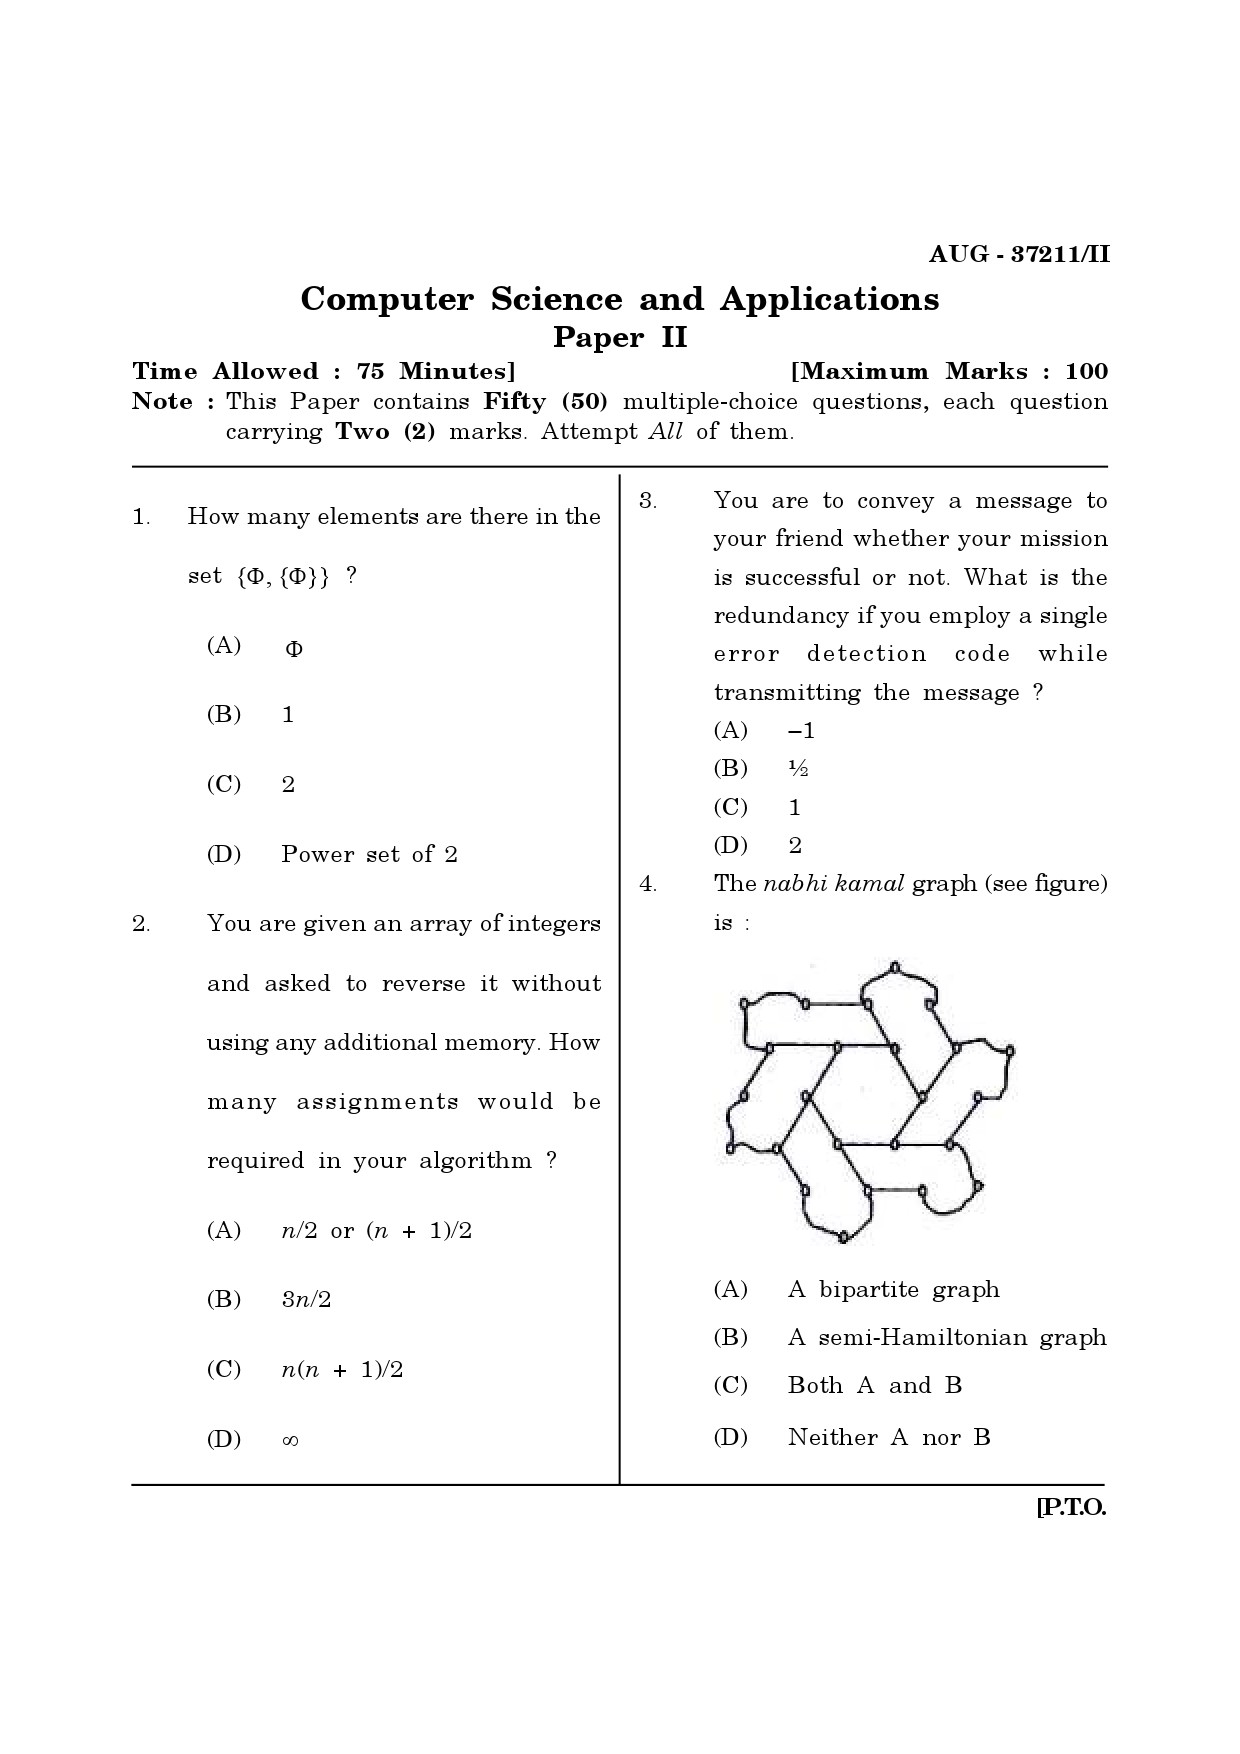 Maharashtra SET Computer Science and Application Question Paper II August 2011 1